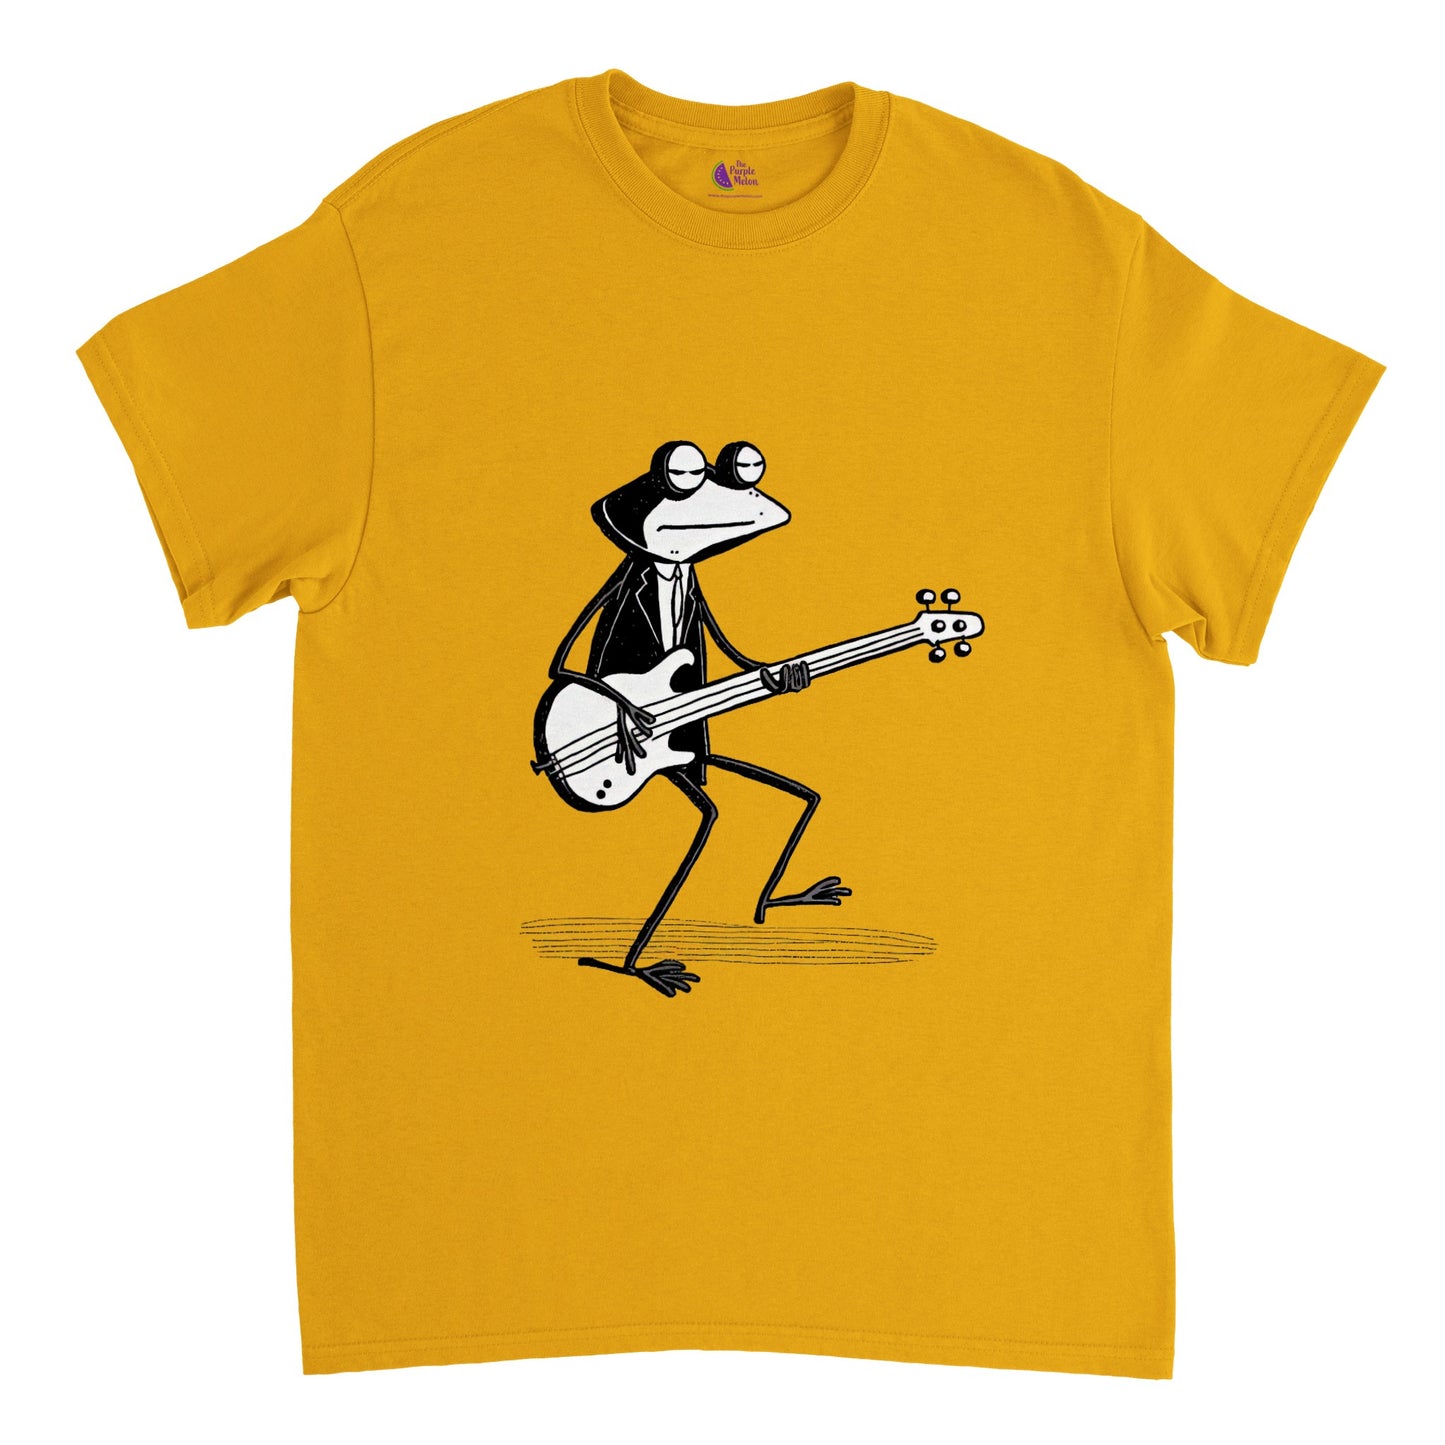 Gold t-shirt with a frog playing a bass guitar print